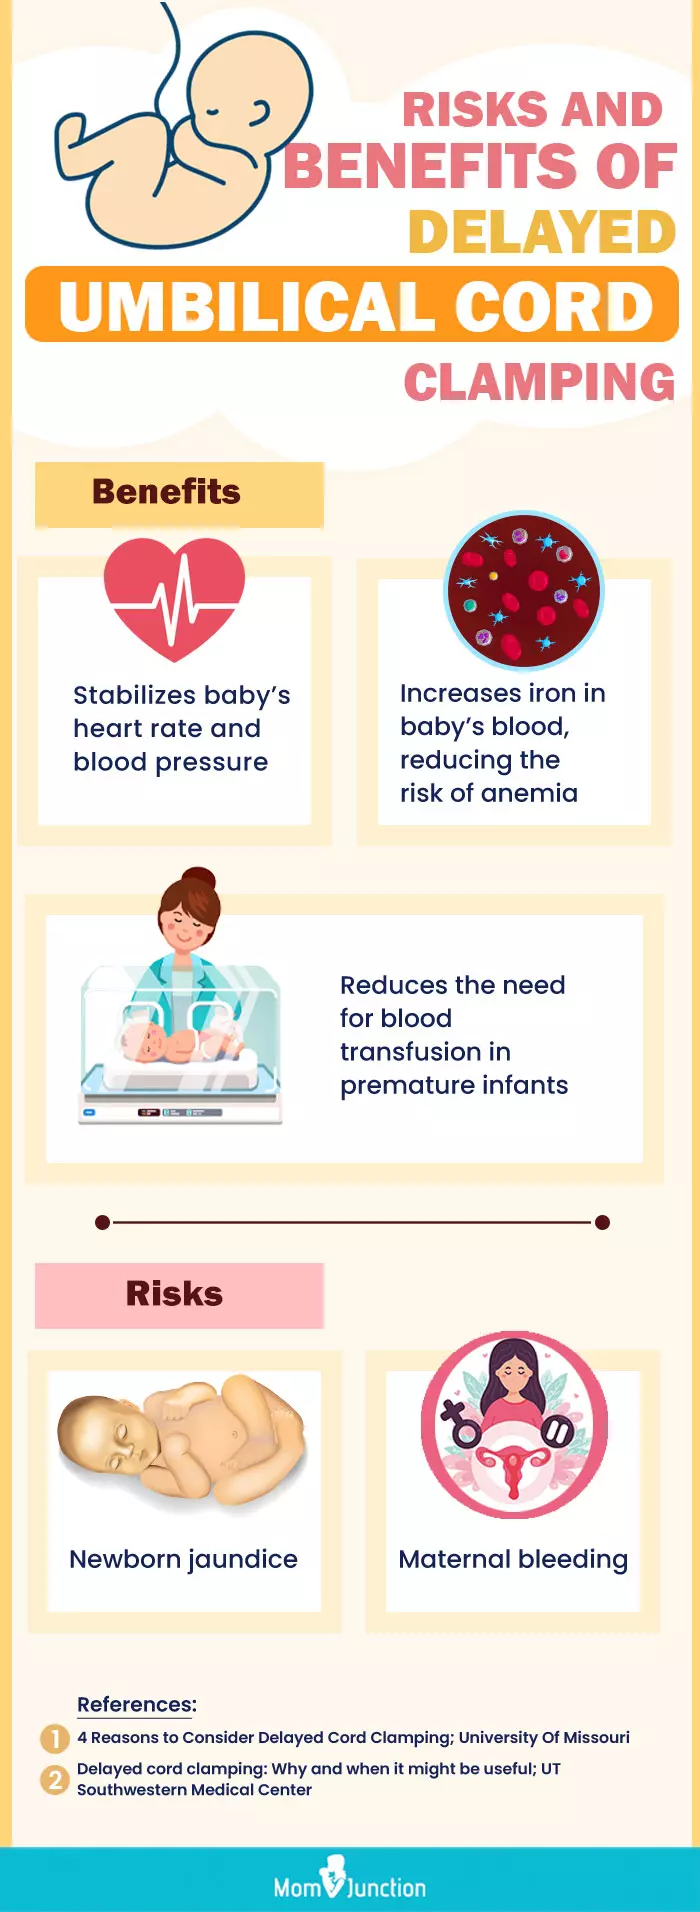 delayed umbilical cord clamping in newborns (infographic)